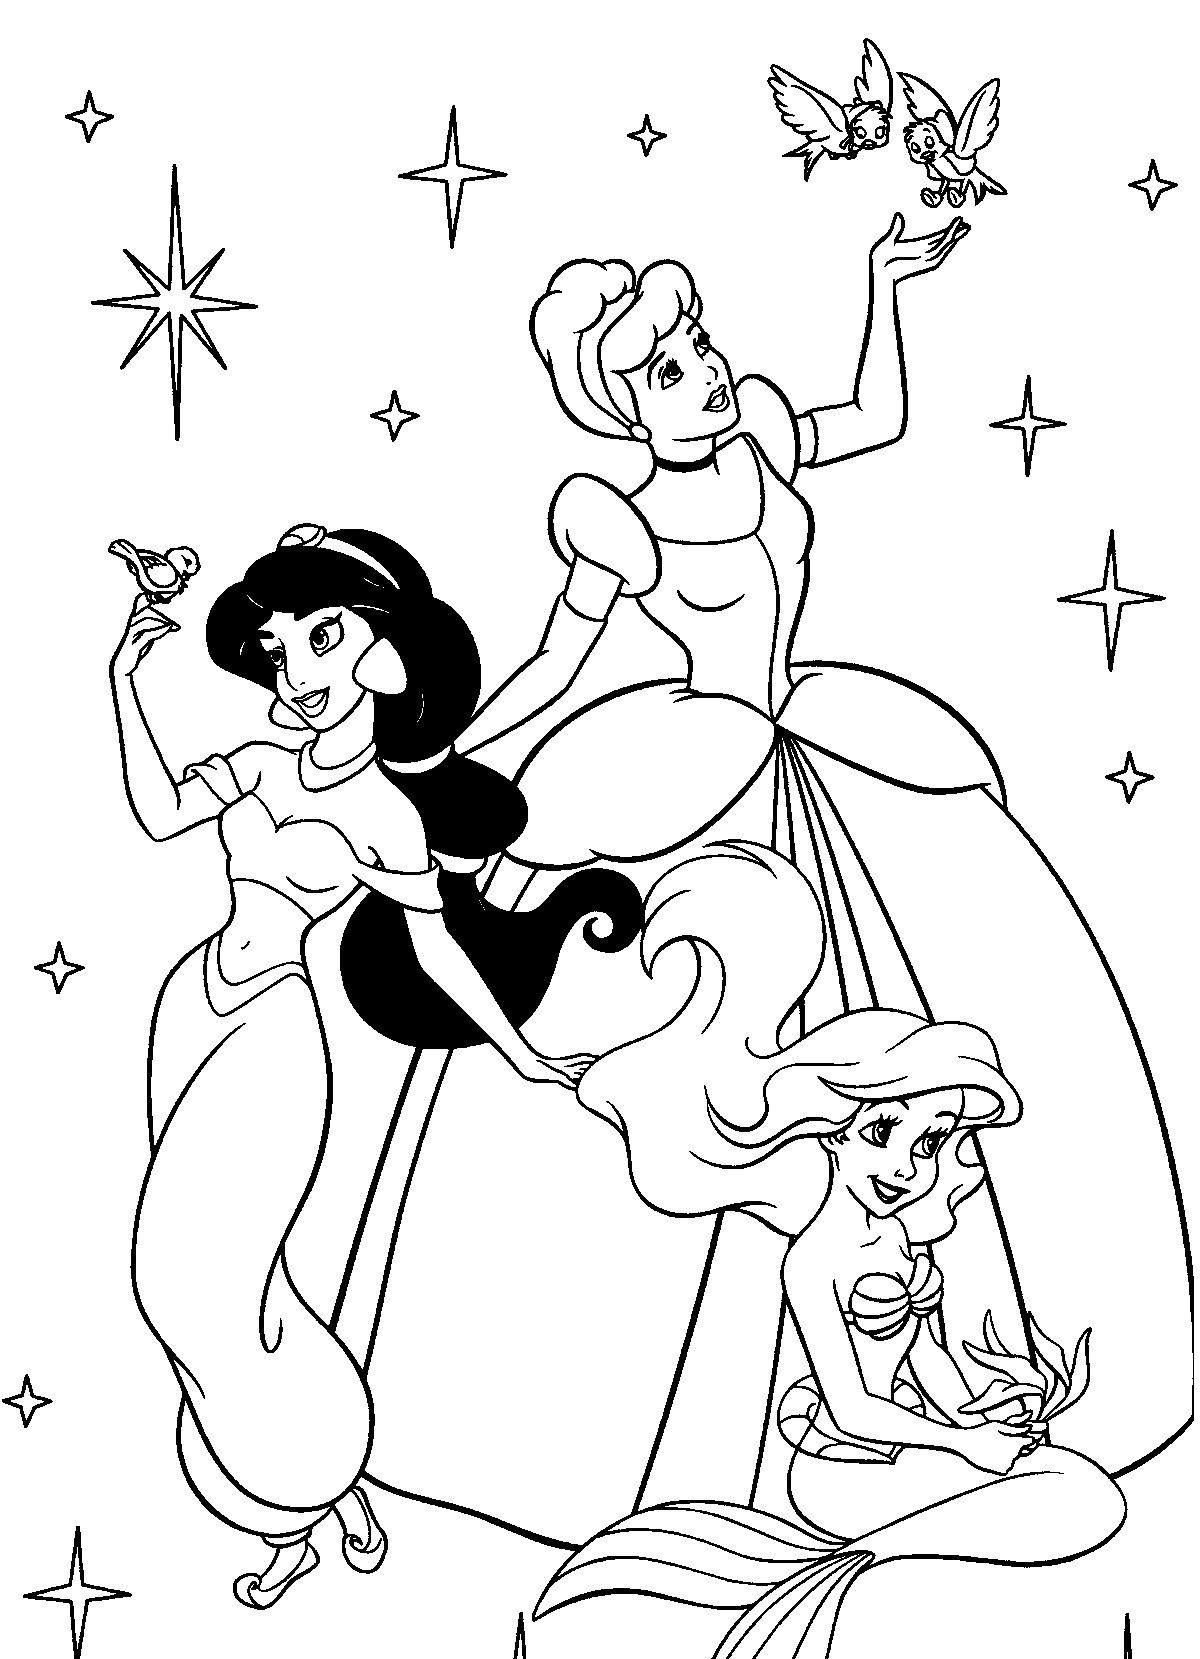 Coloring Sheets For Girls Free Printable
 coloring pages for girls disney free